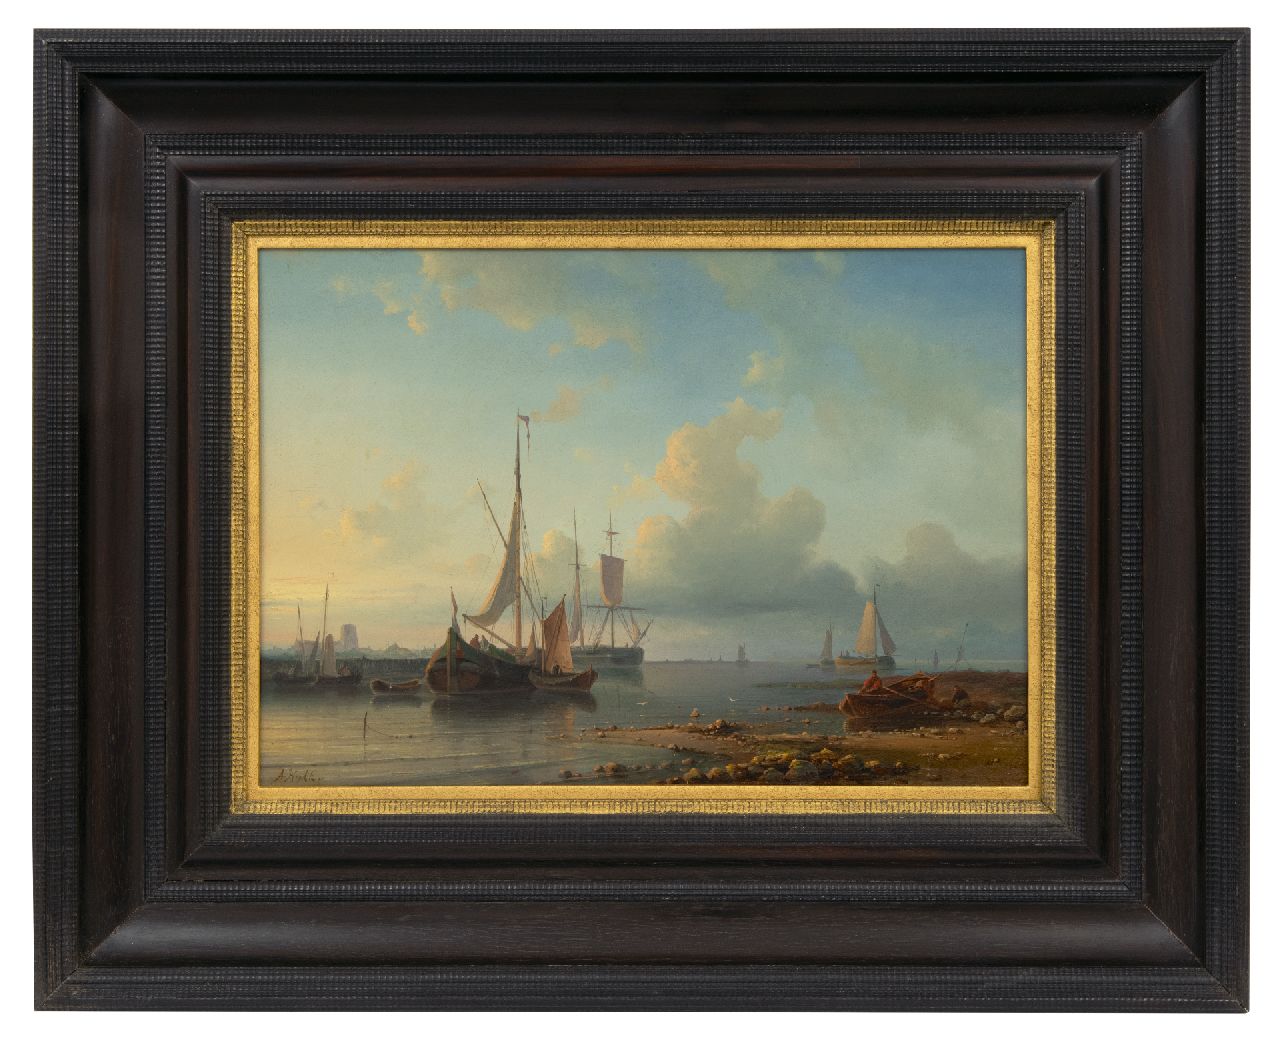 Hulk A.  | Abraham Hulk | Paintings offered for sale | Ships at anchor in calm waters, oil on panel 30.7 x 44.1 cm, signed l.l.